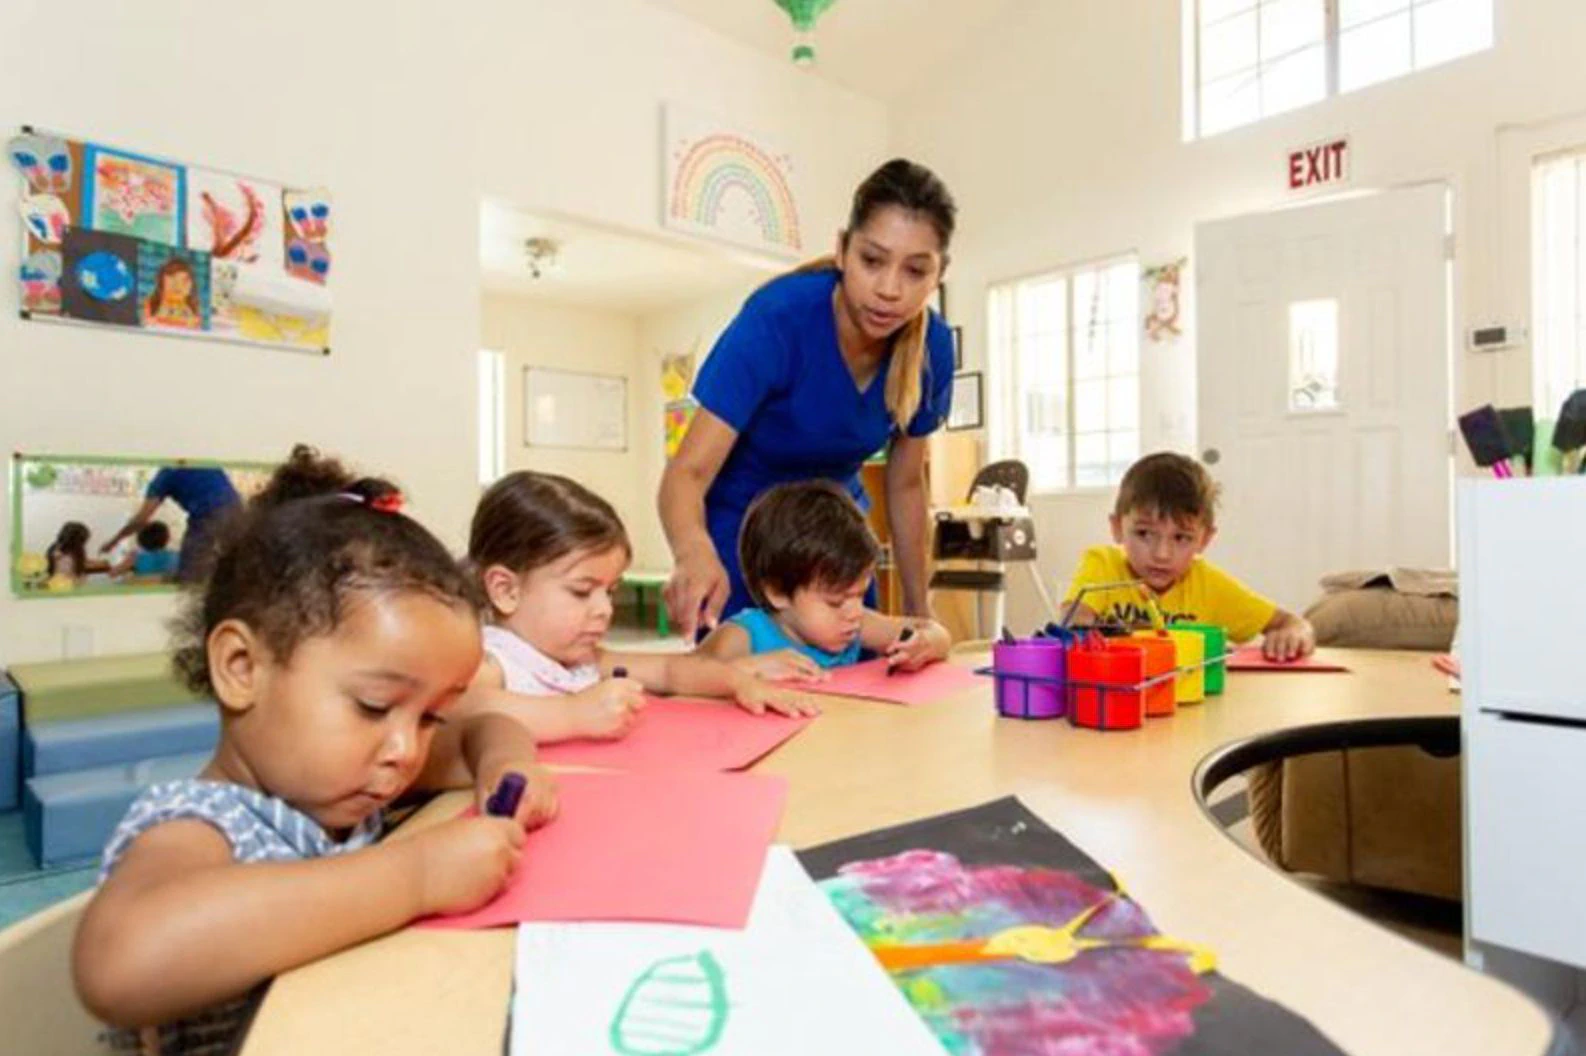 Upwards childcare provider Tanya Garcia works with children as they create artwork at daycare.